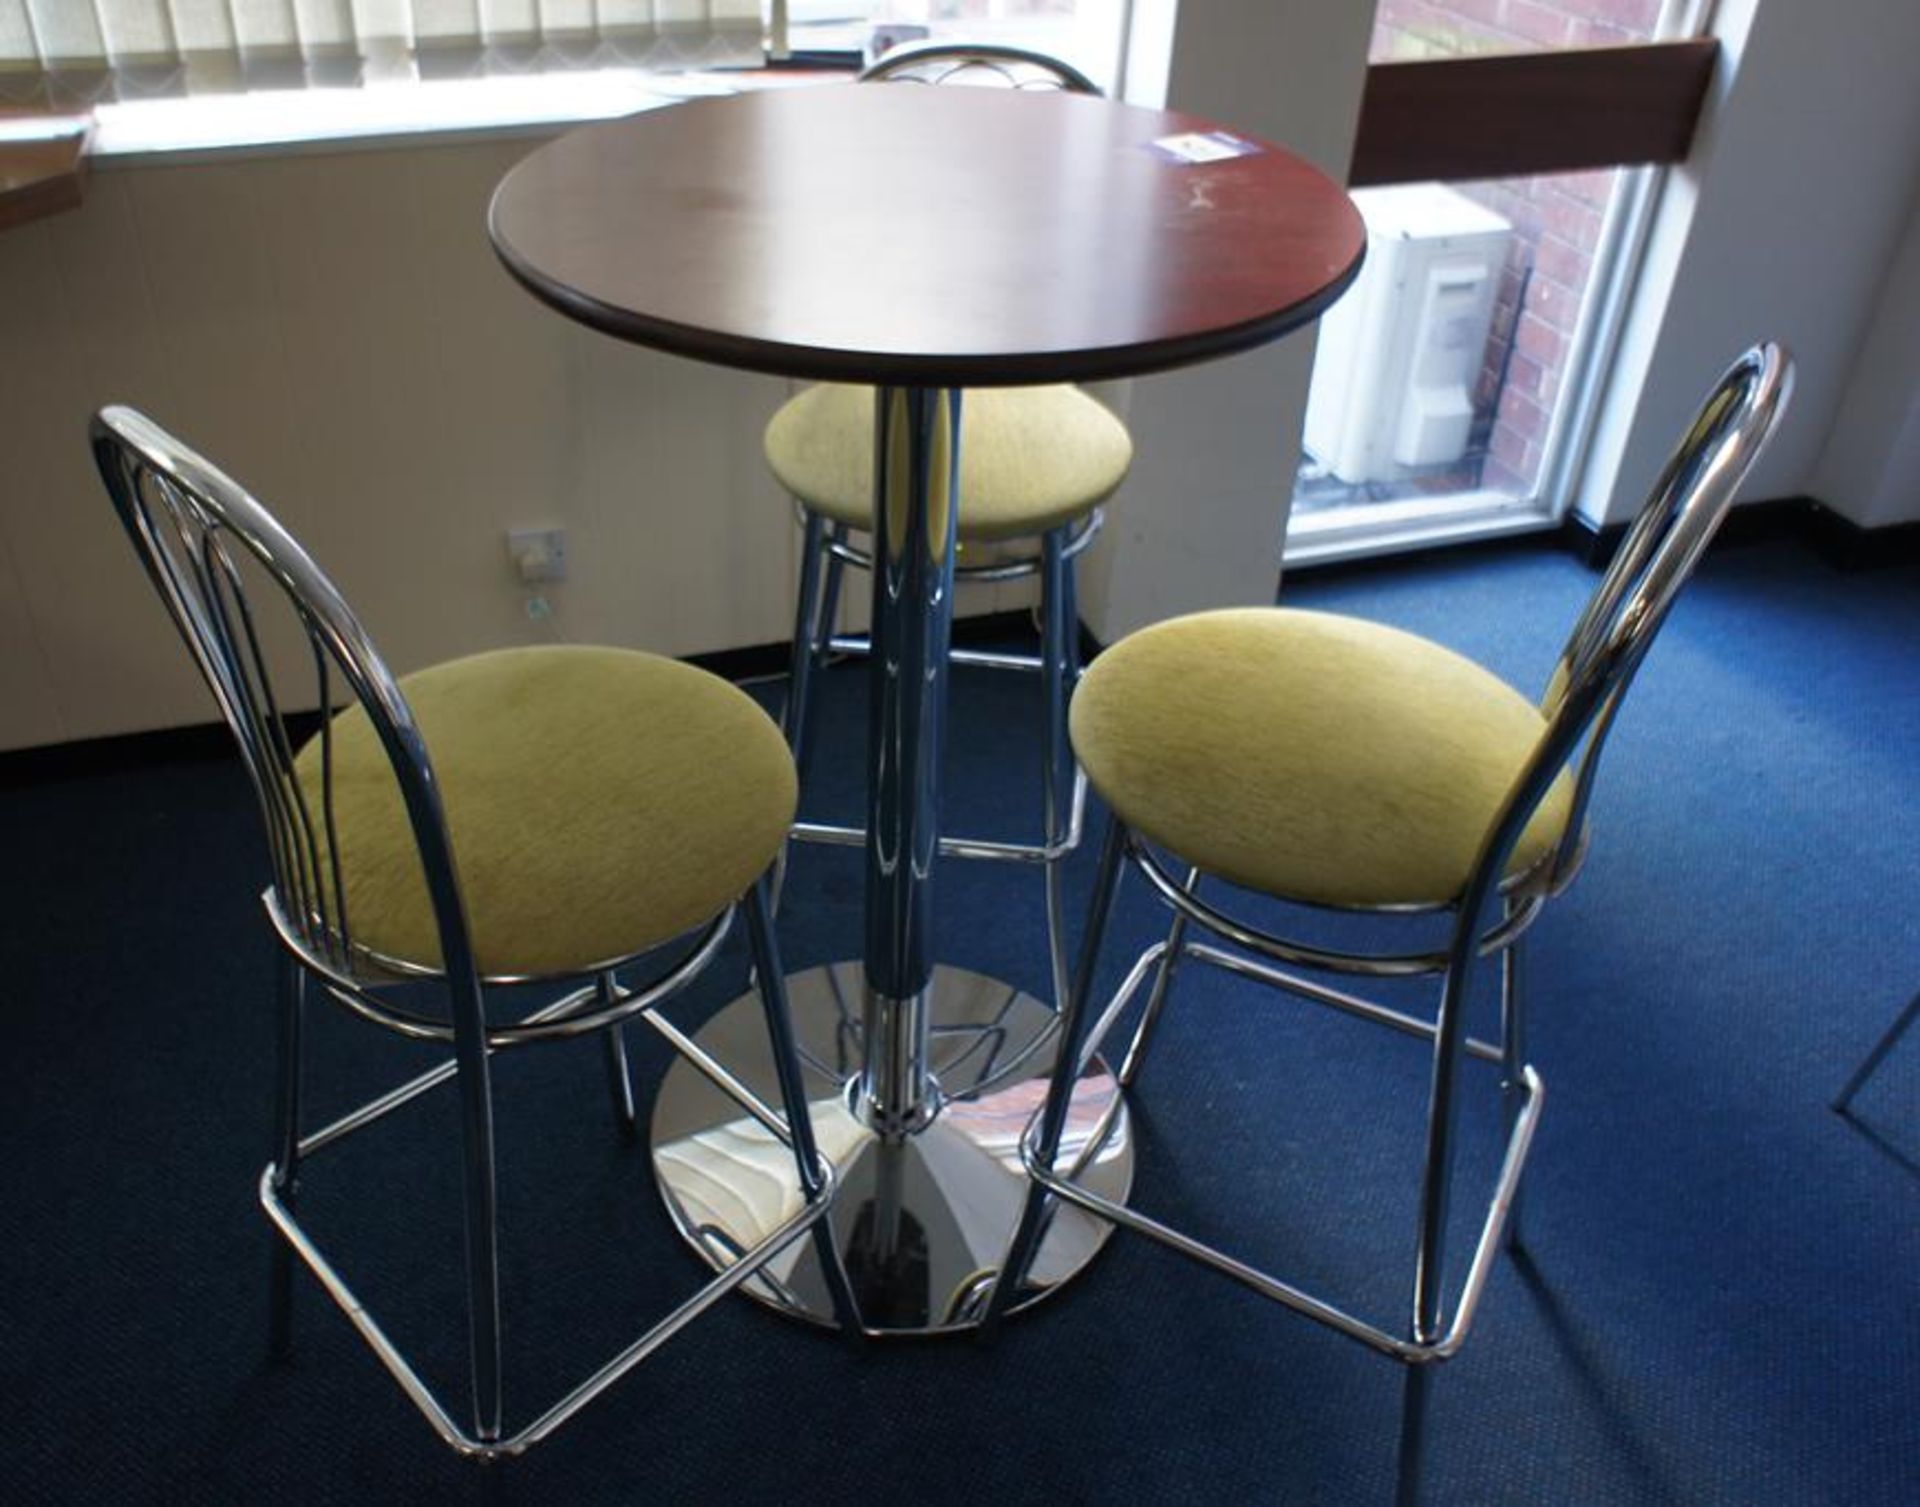 * Mahogany Effect Poseur Table 680 diameter with 3 x Chrome Framed Stools Photographs are provided - Image 2 of 3